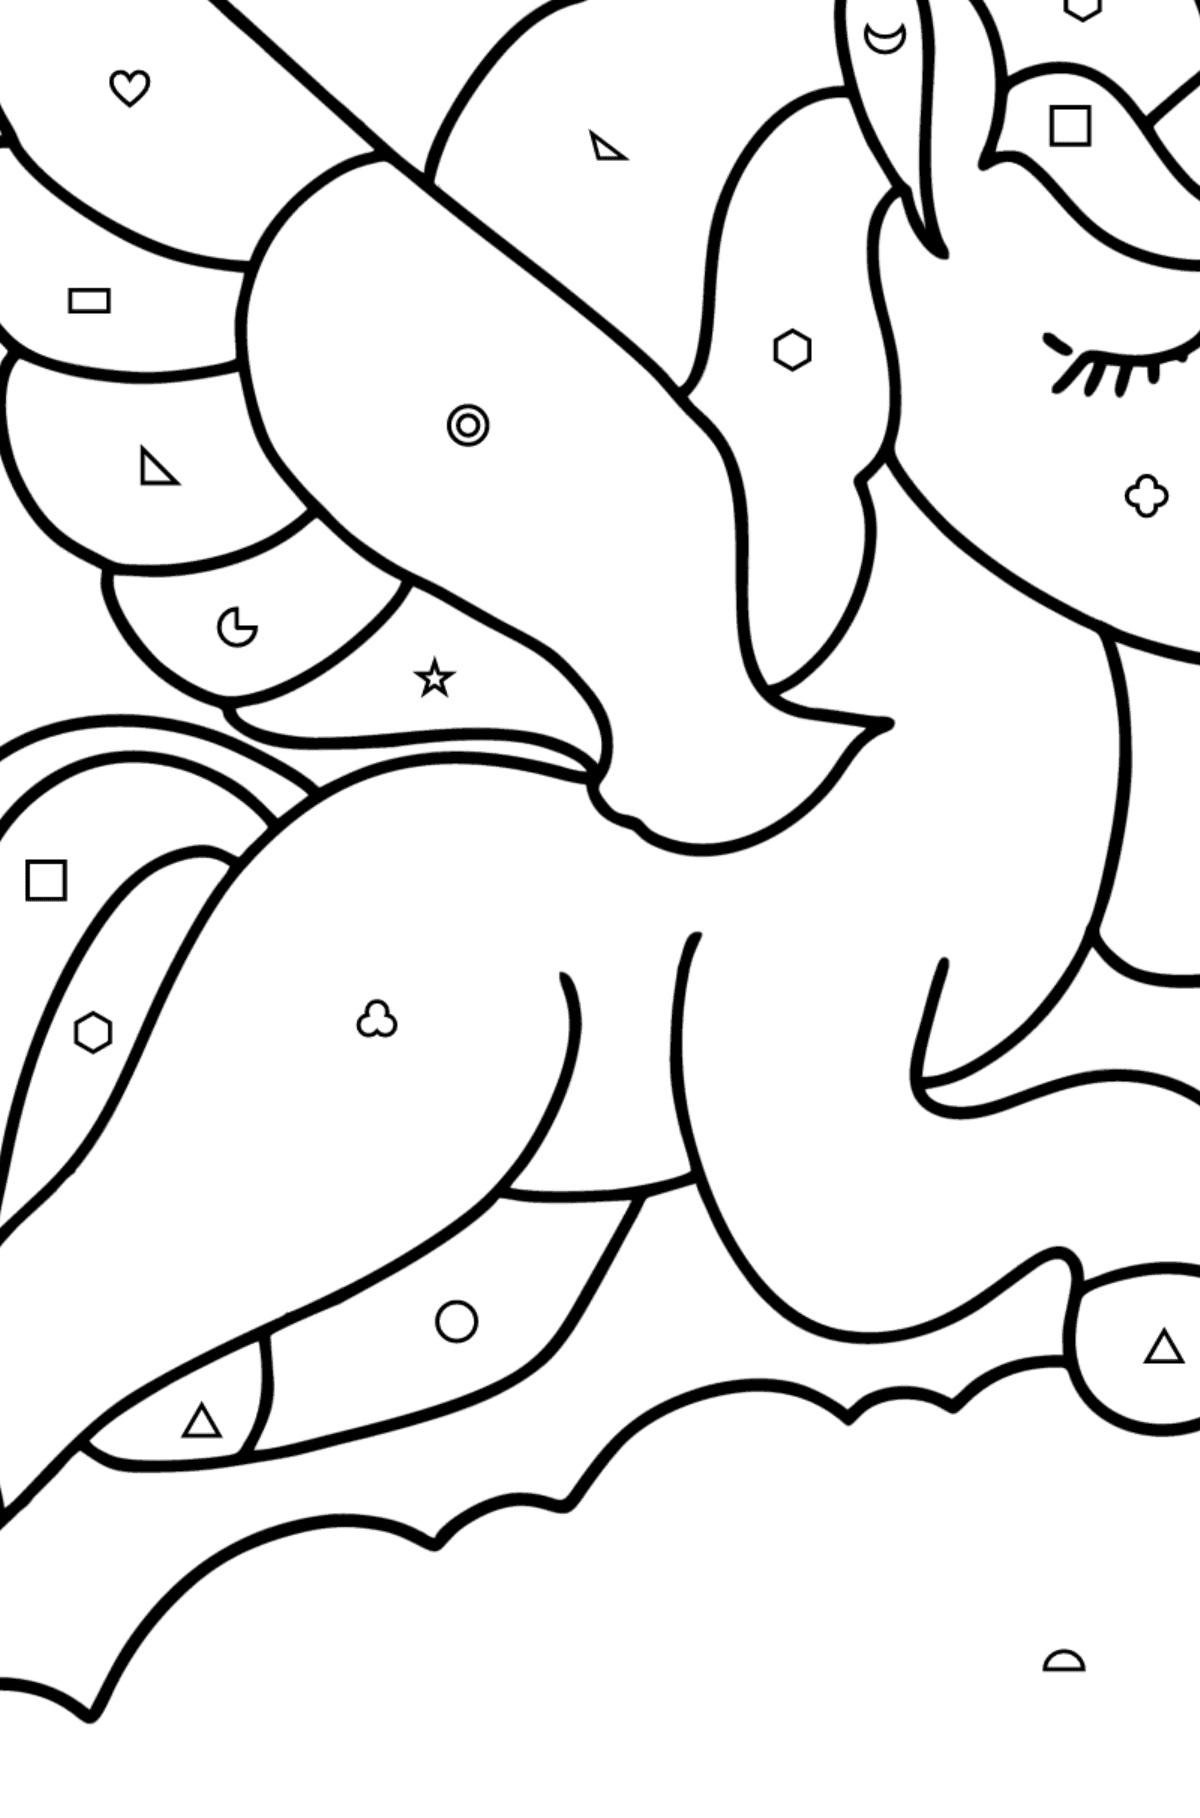 Unicorn with wings coloring page - Coloring by Geometric Shapes for Kids